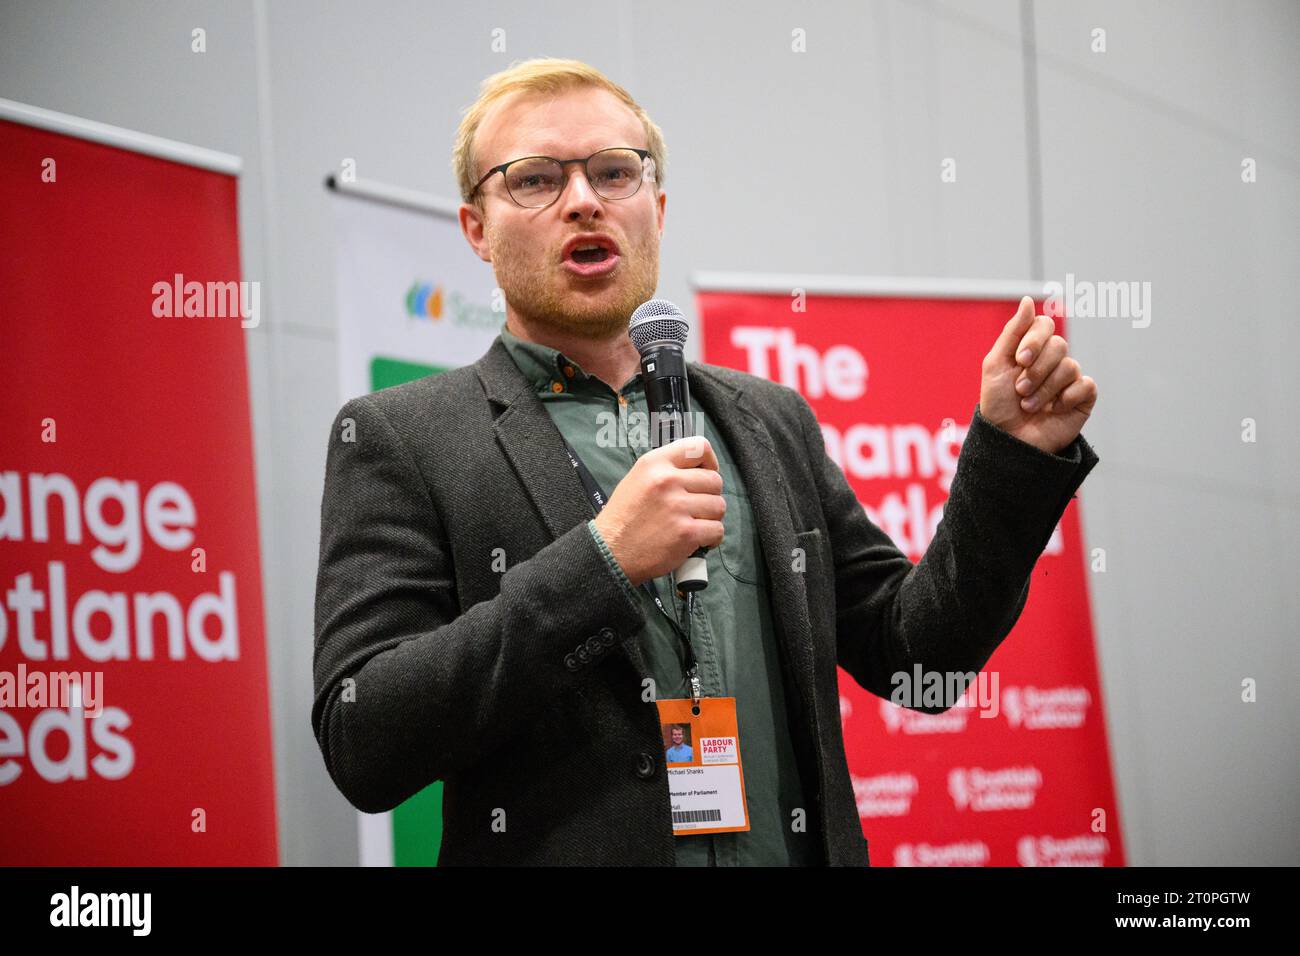 London, UK. 8 October 2023. Michael Shanks MP  speaking at ‘Scots Night’ Scottish Labour Party fringe event, during the Labour Party Conference in Liverpool. Photo credit should read: Matt Crossick/Empics/Alamy Live News Stock Photo